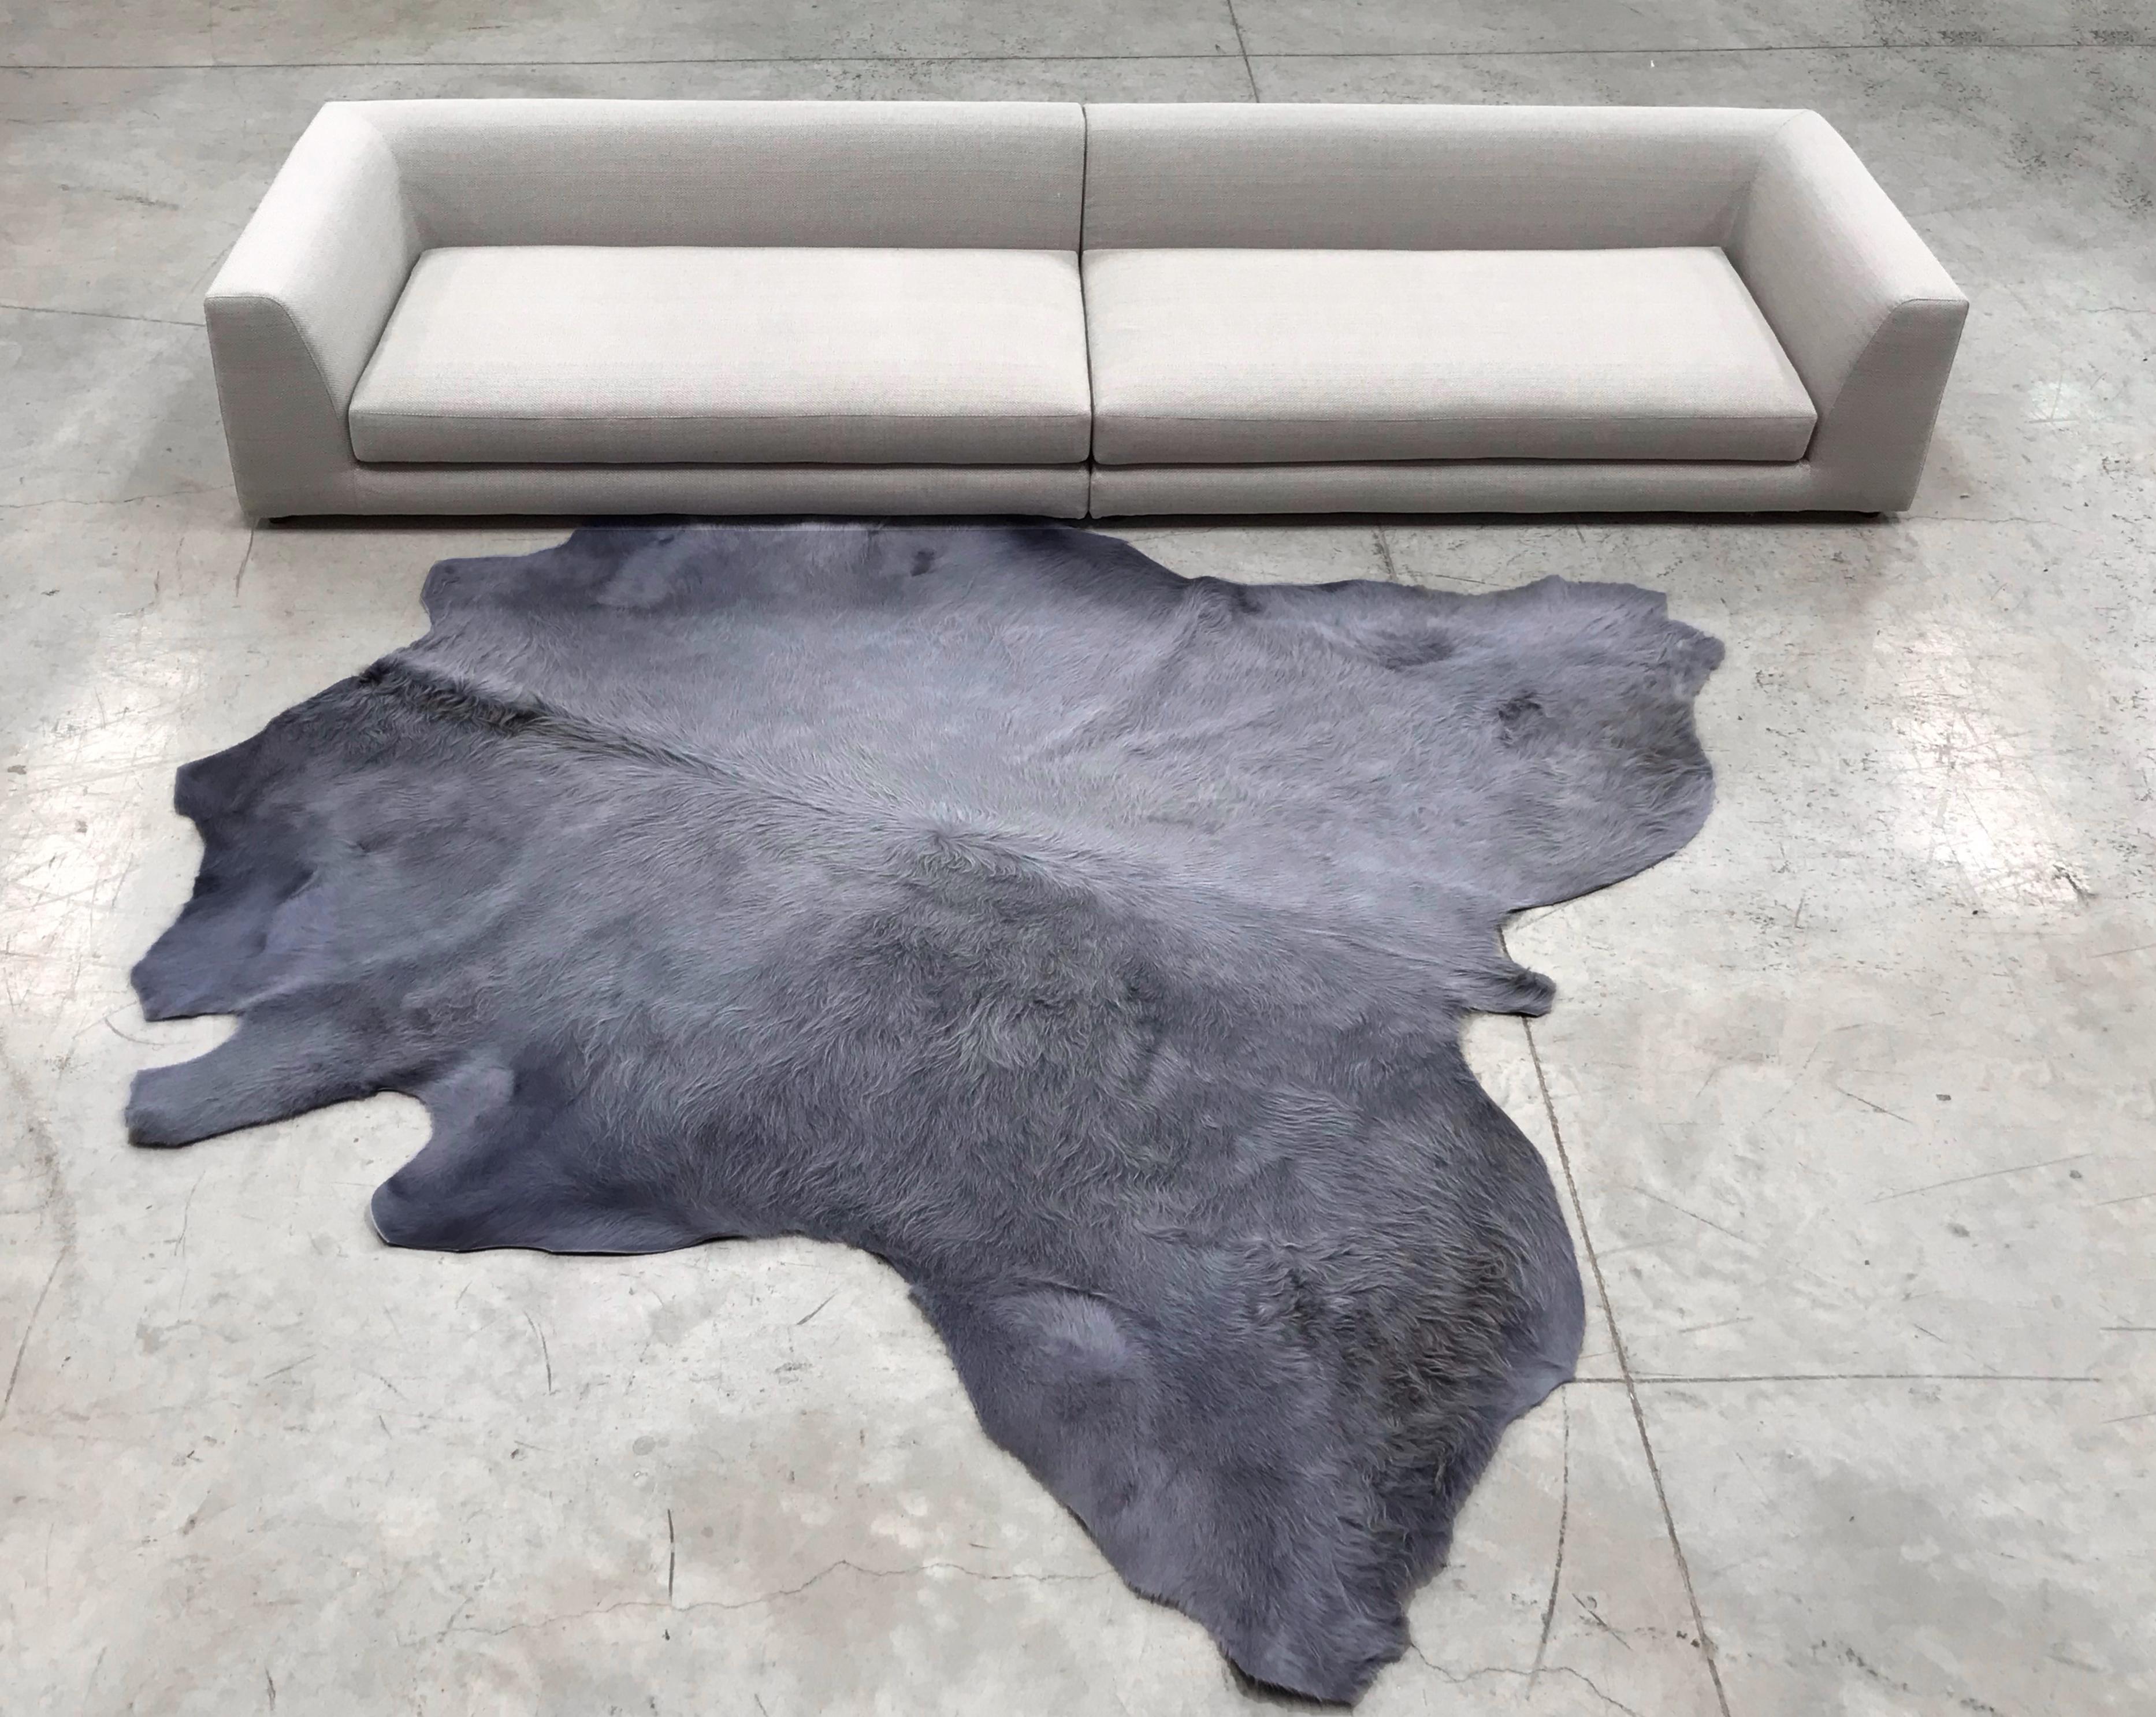 Cowhide rugs in Khaki, sustainably sourced and hand-dyed.
Approximate dimensions: 230-260 x 230-260cm
Six different colors: Salmon pink, burgundy, khaki, light grey, mid grey and black

Please note that color hues may vary from batch to batch